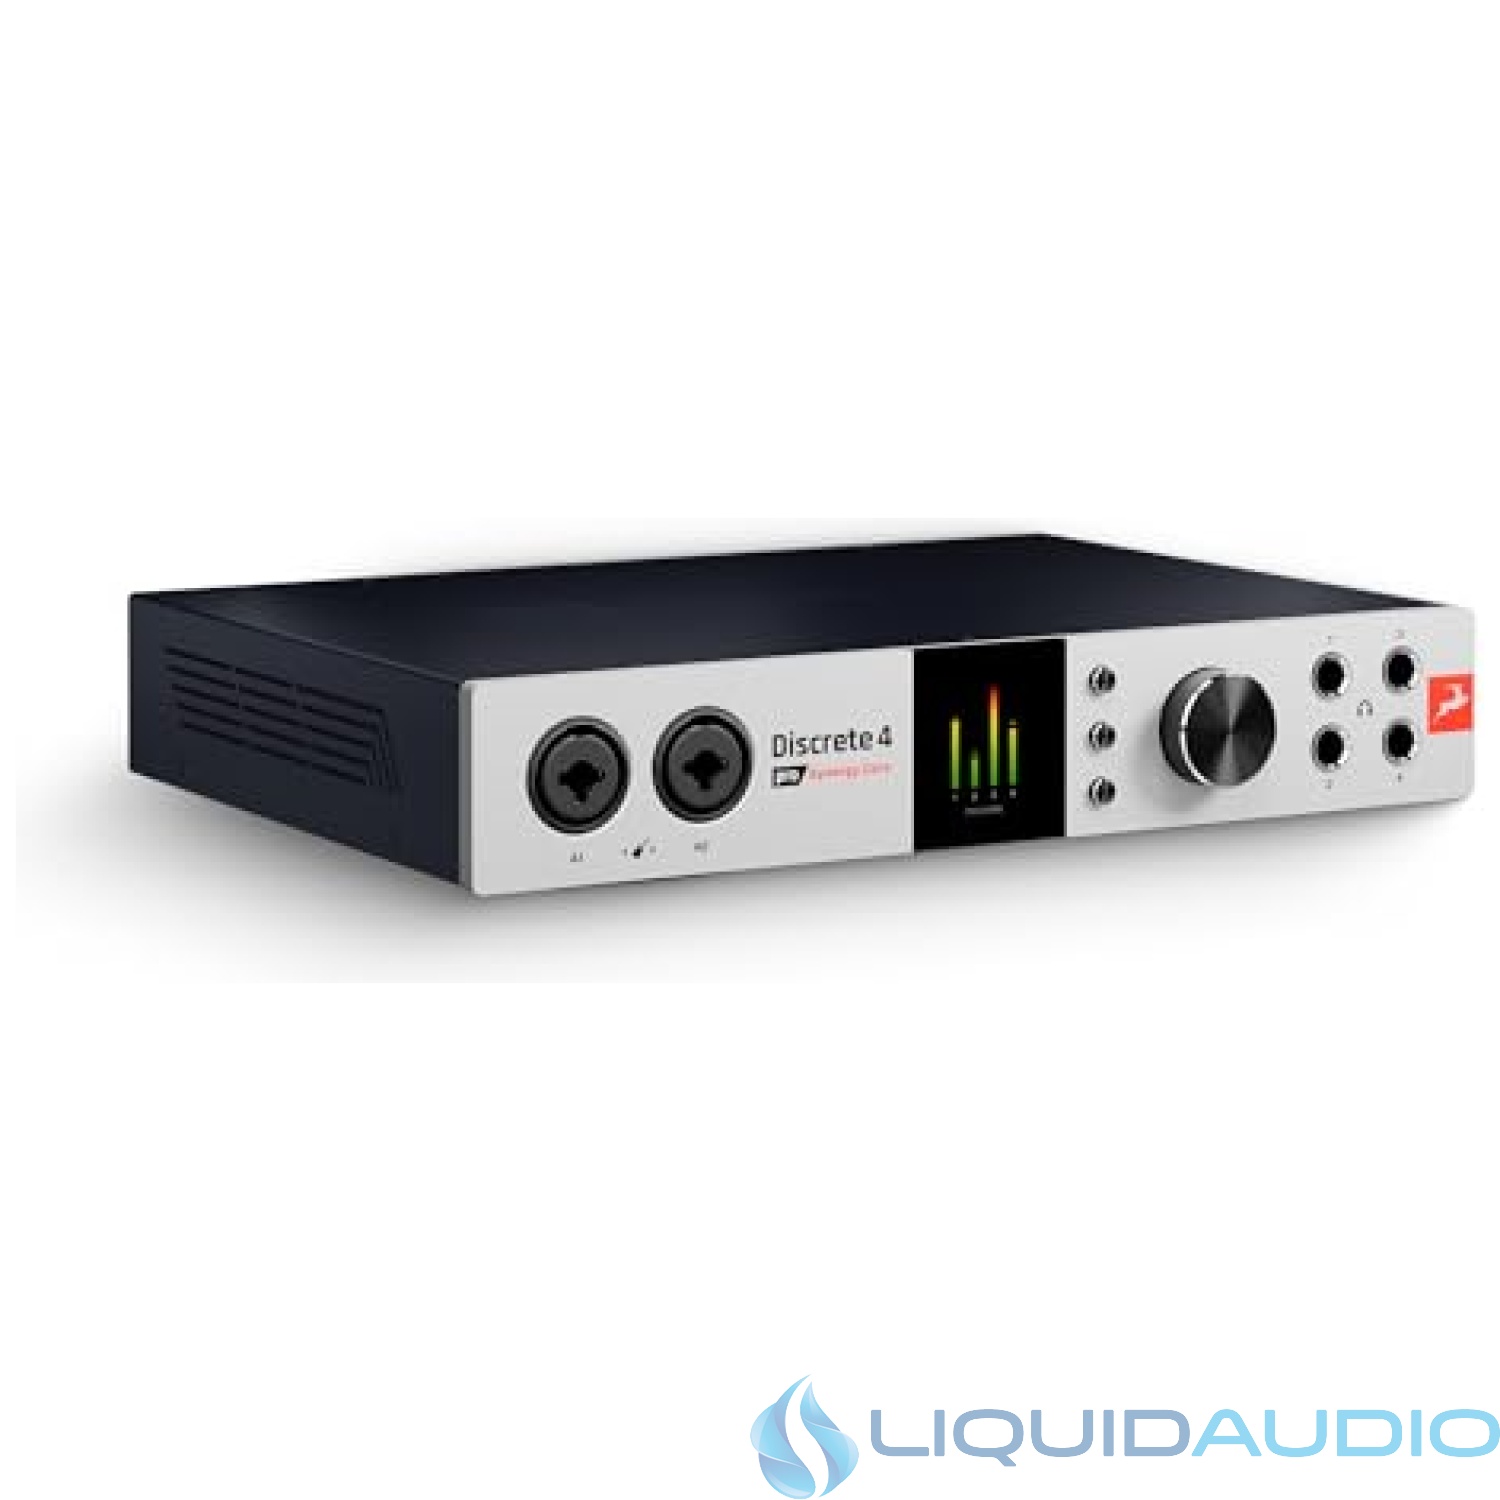 Discrete 4 Pro Synergy Core 14x20 Thunderbolt 3 and USB 2.0 Audio Interface with Onboard Real-time Effects - Antelope Audio